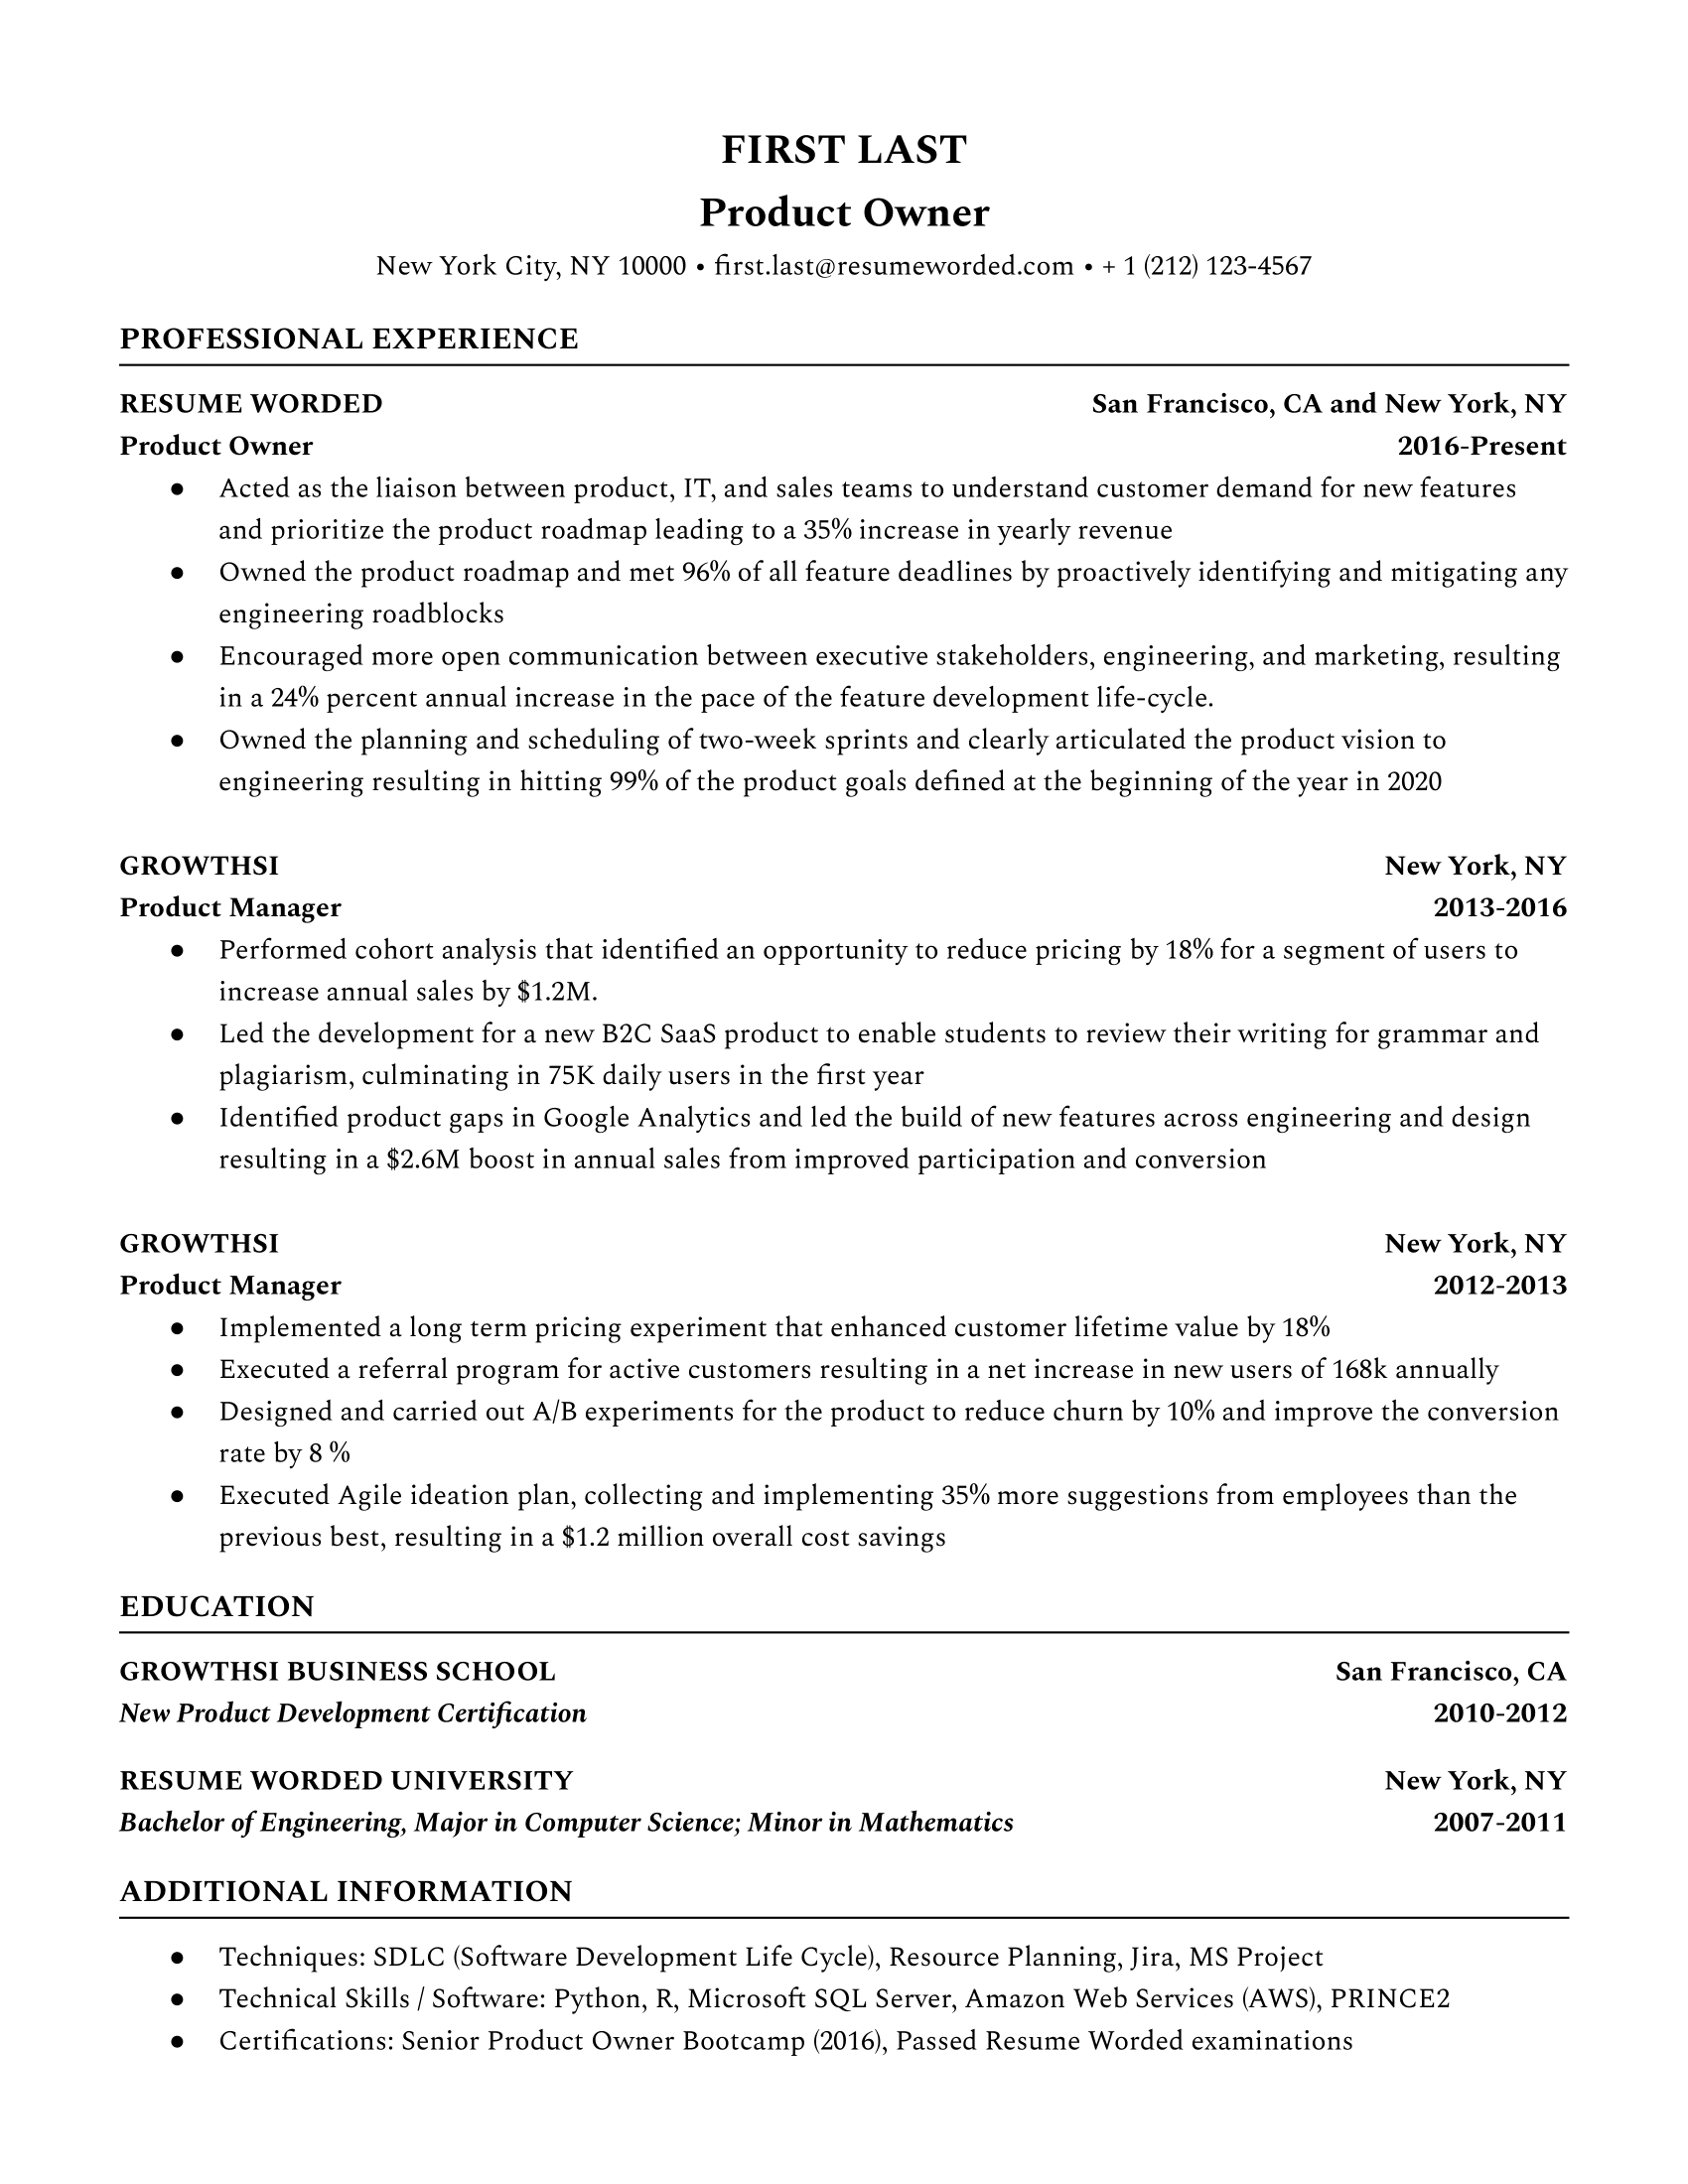 Discuss any relevant internship experience (or tailor non-relevant experience to the role) - Entry Level/Junior Financial Analyst Resume